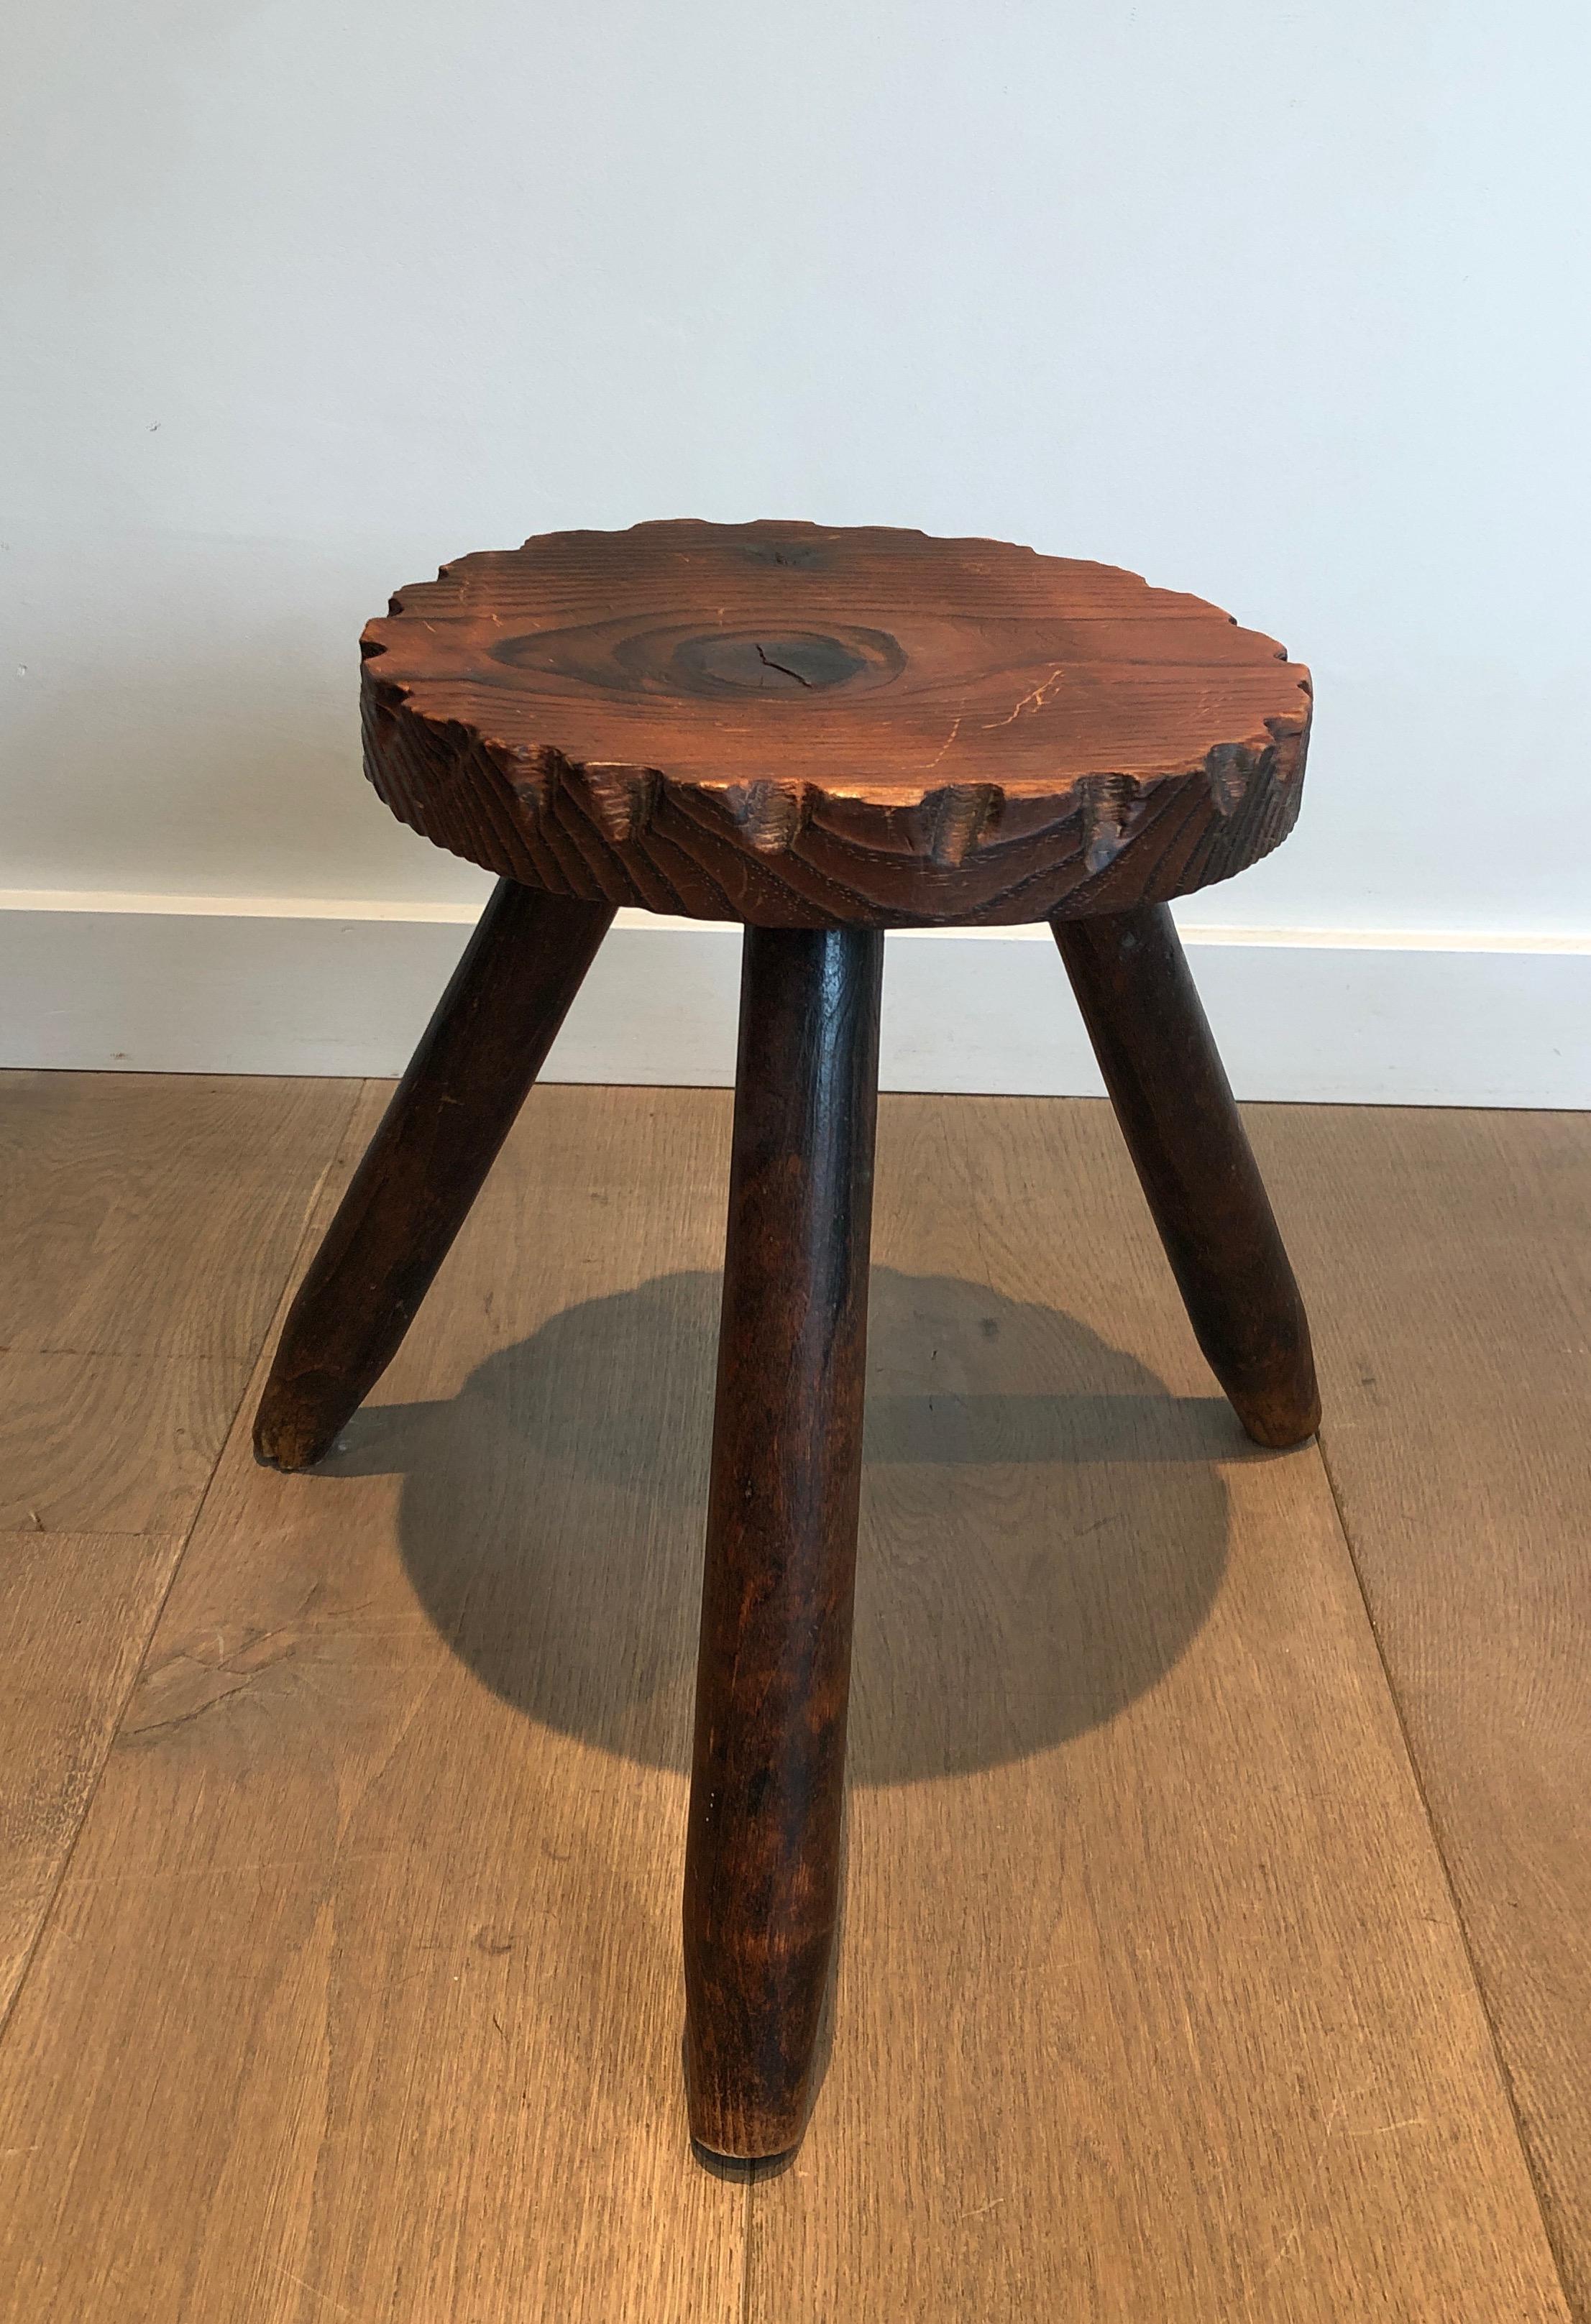 Pair of Pine Brutalist Stools, French Work, circa 1950 For Sale 5